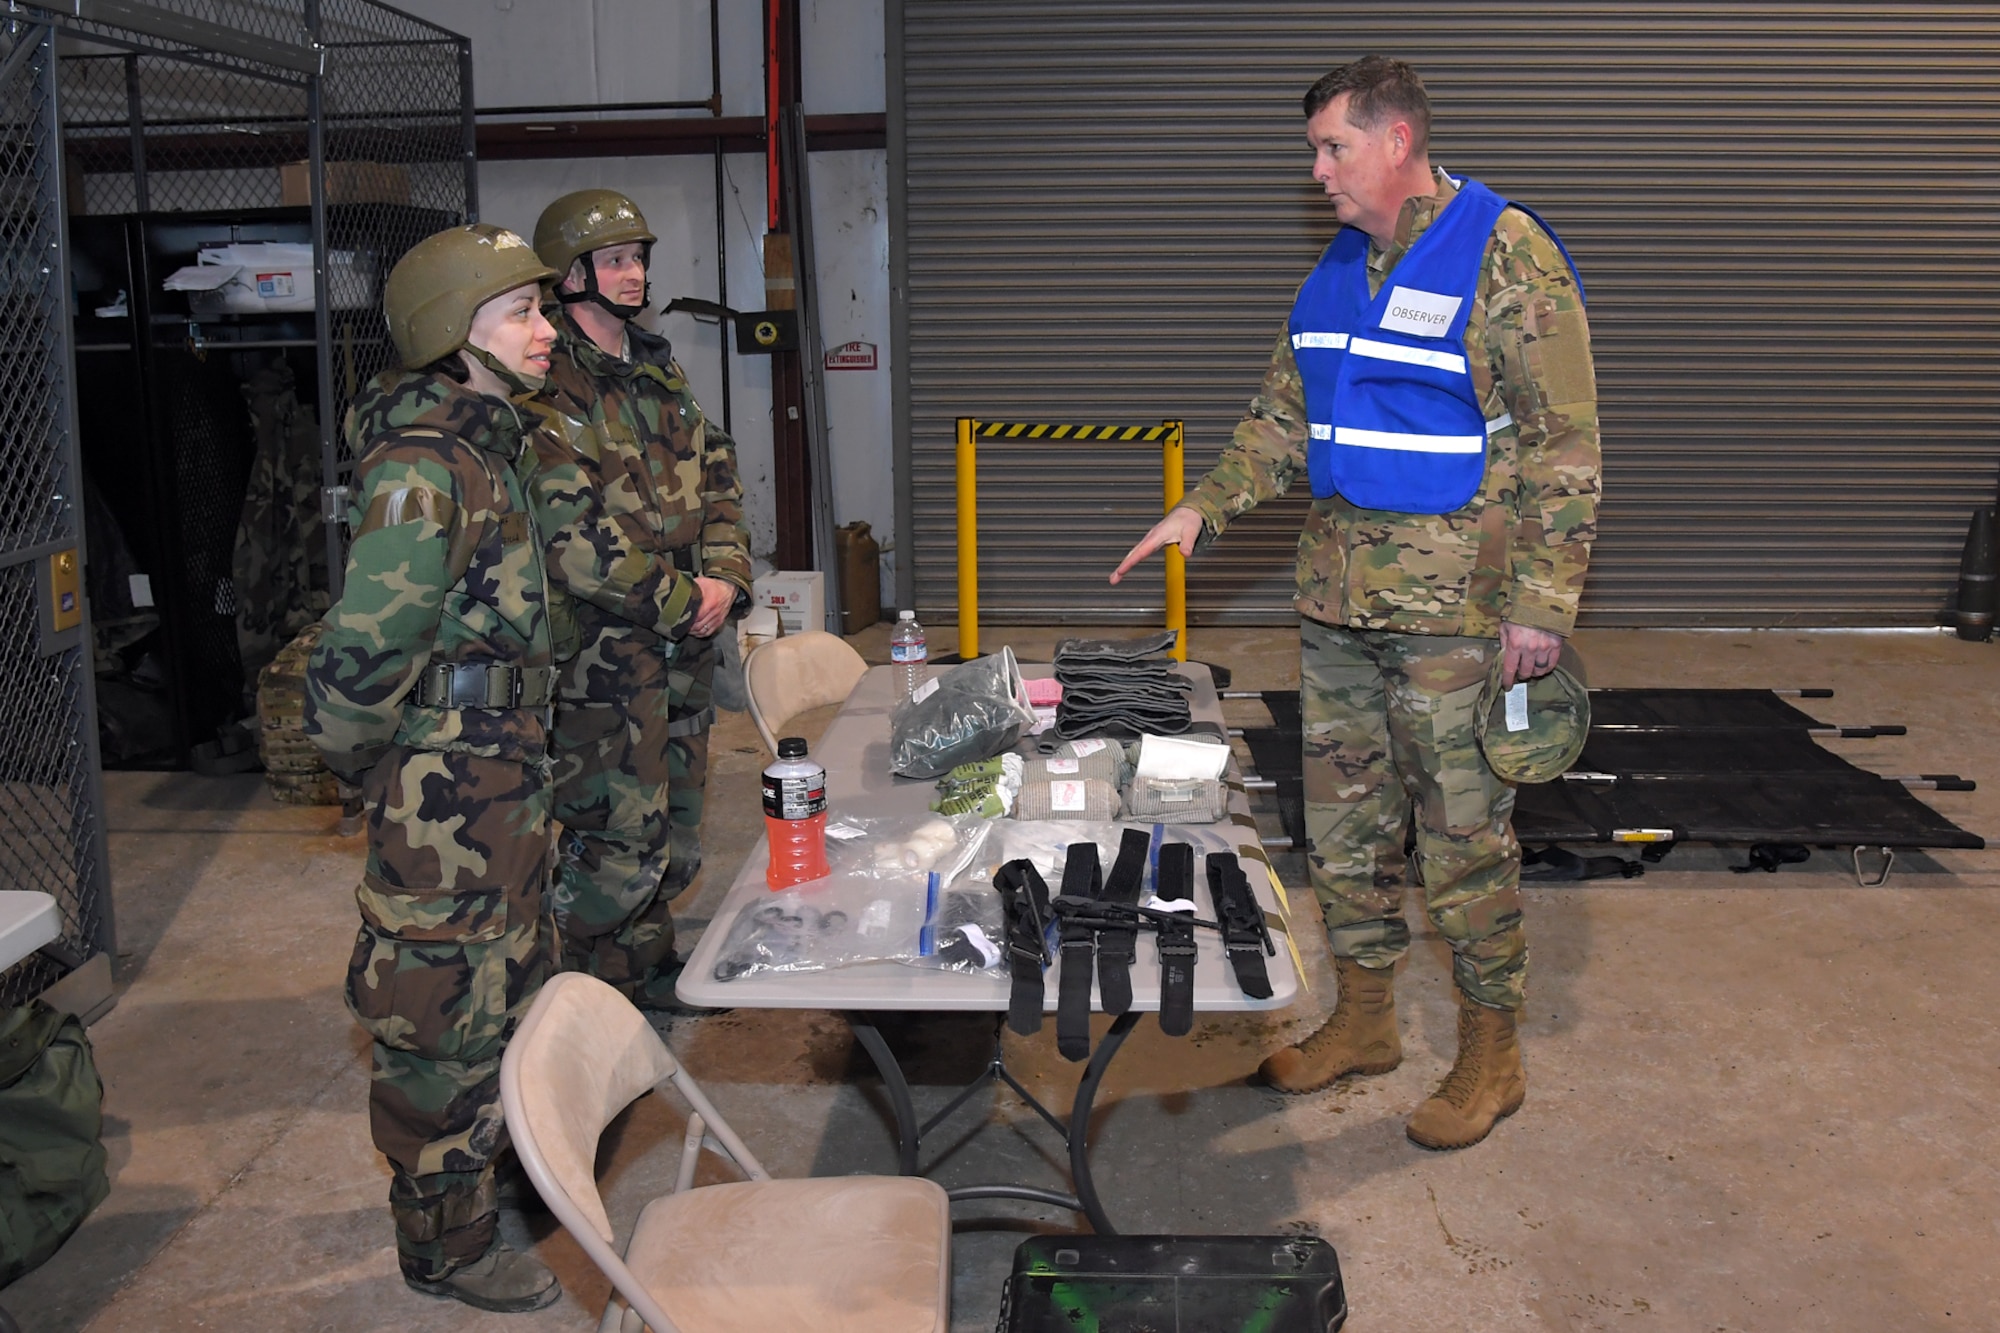 Lt. Gen. Gene Kirkland, Air Force Sustainment Center commander, discusses medical readiness with Staff Sgt. Priscilla Webb, 75th Medical Operations Squadron, and Capt. Isaac Yourison, 75th Aerospace Medicine Squadron, during a readiness exercise Feb. 7, 2019, at Hill Air Force Base, Utah.